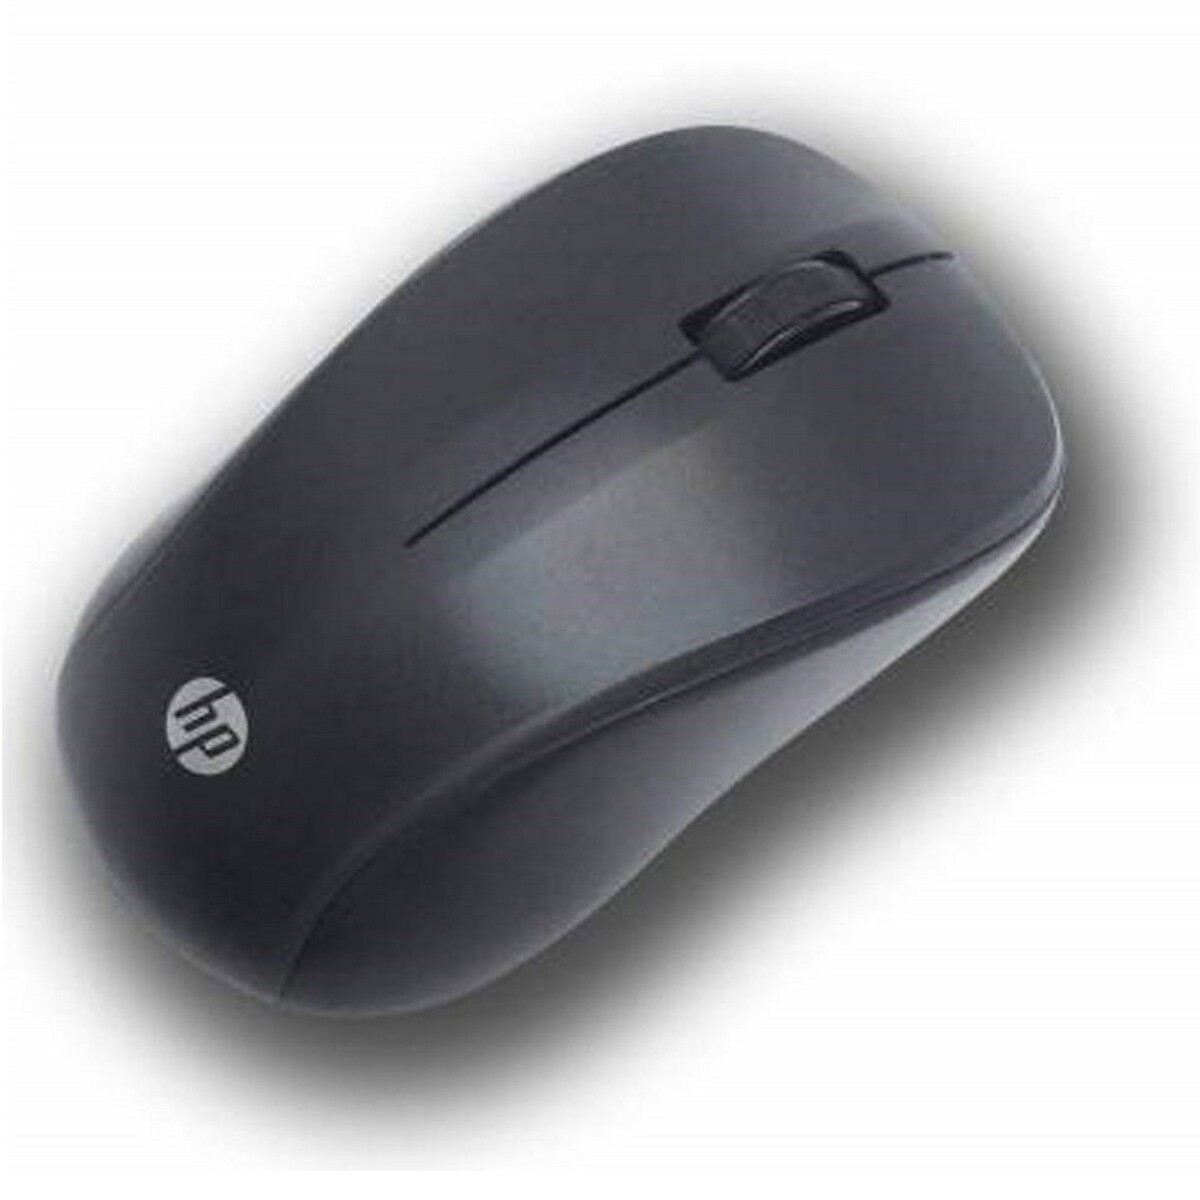 HP Wireless Mouse S500